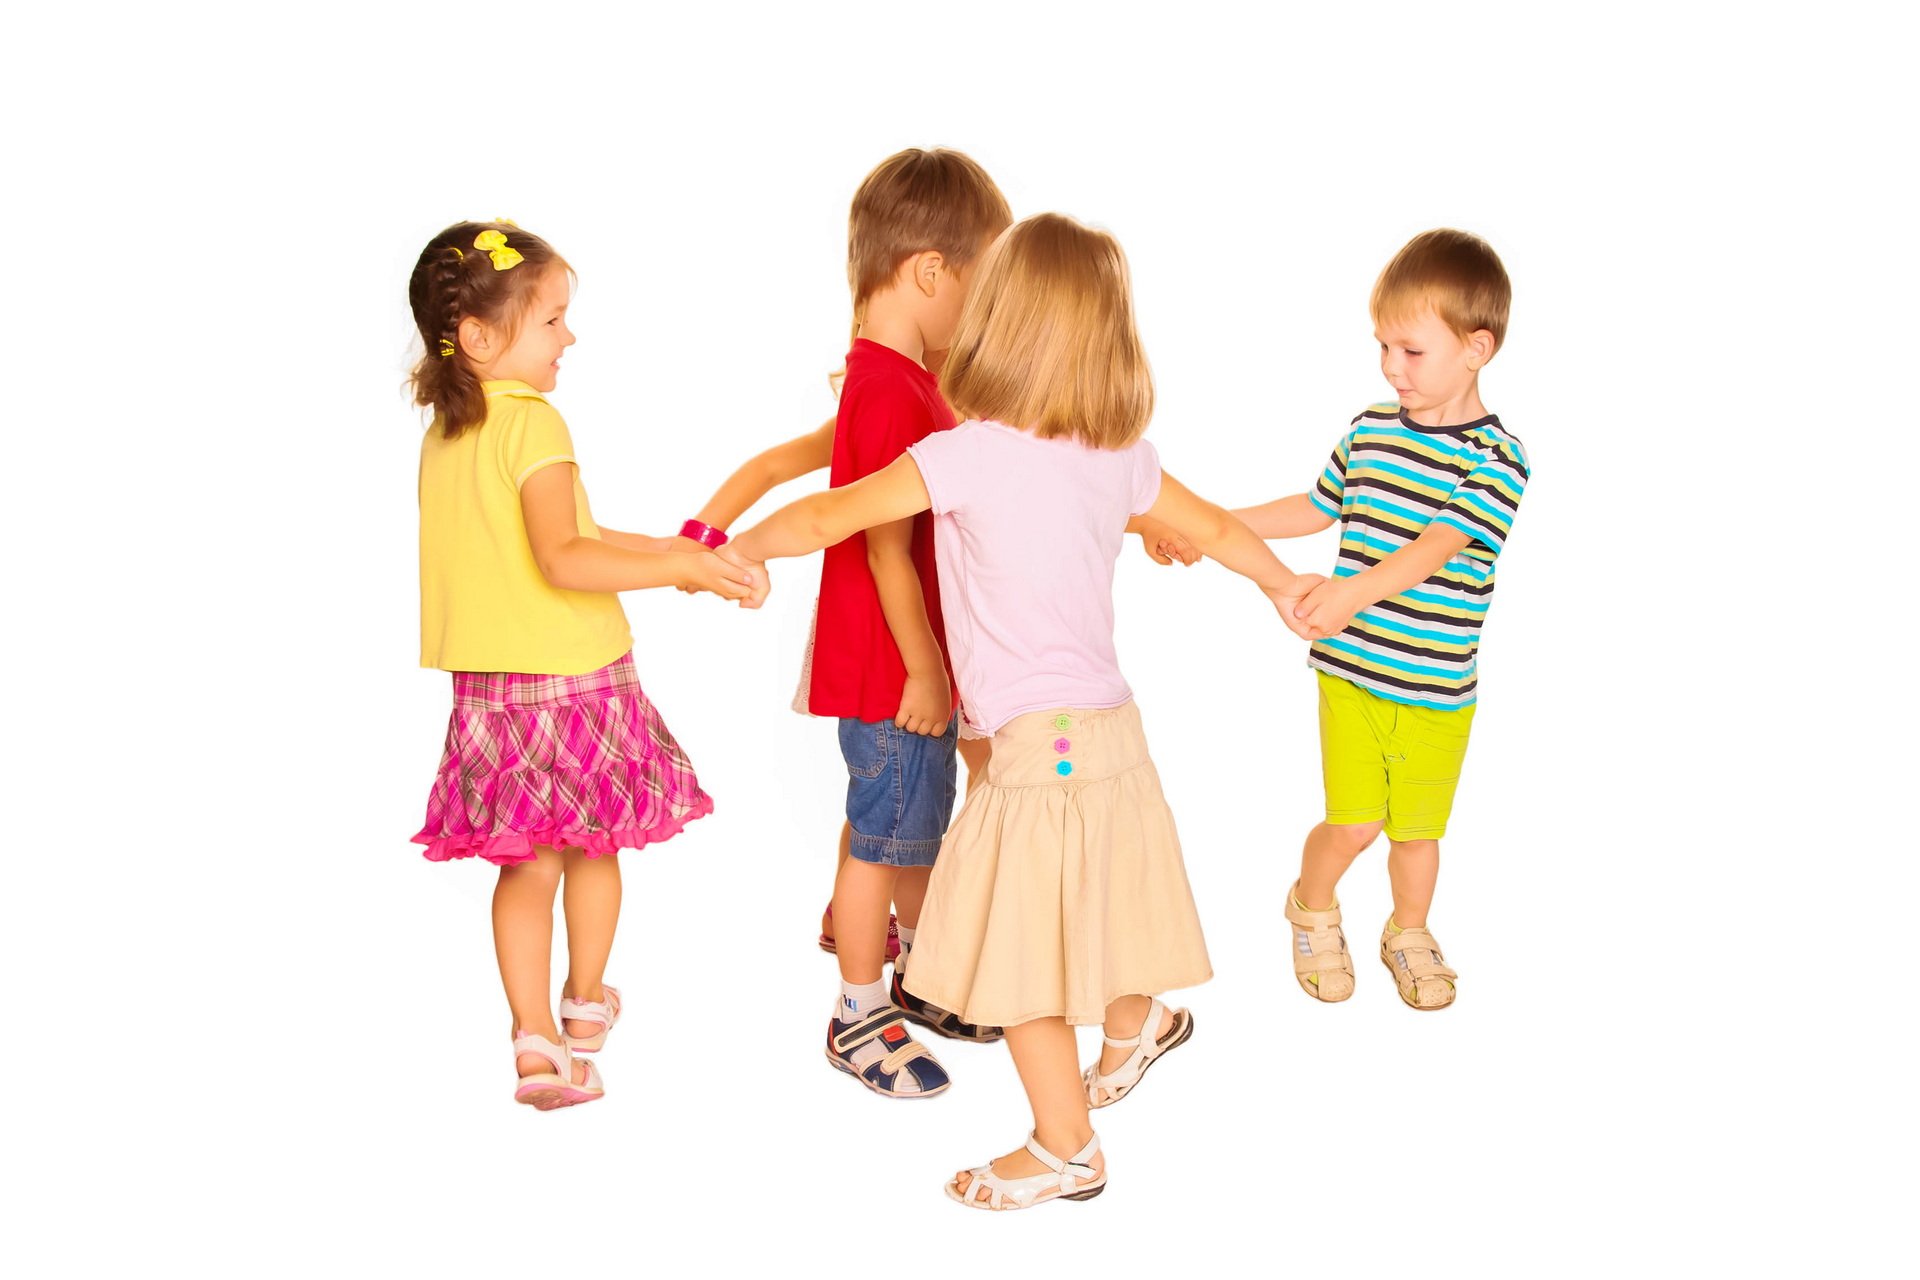 Group of little children dancing, having fun holding hands. Isolated on white background.